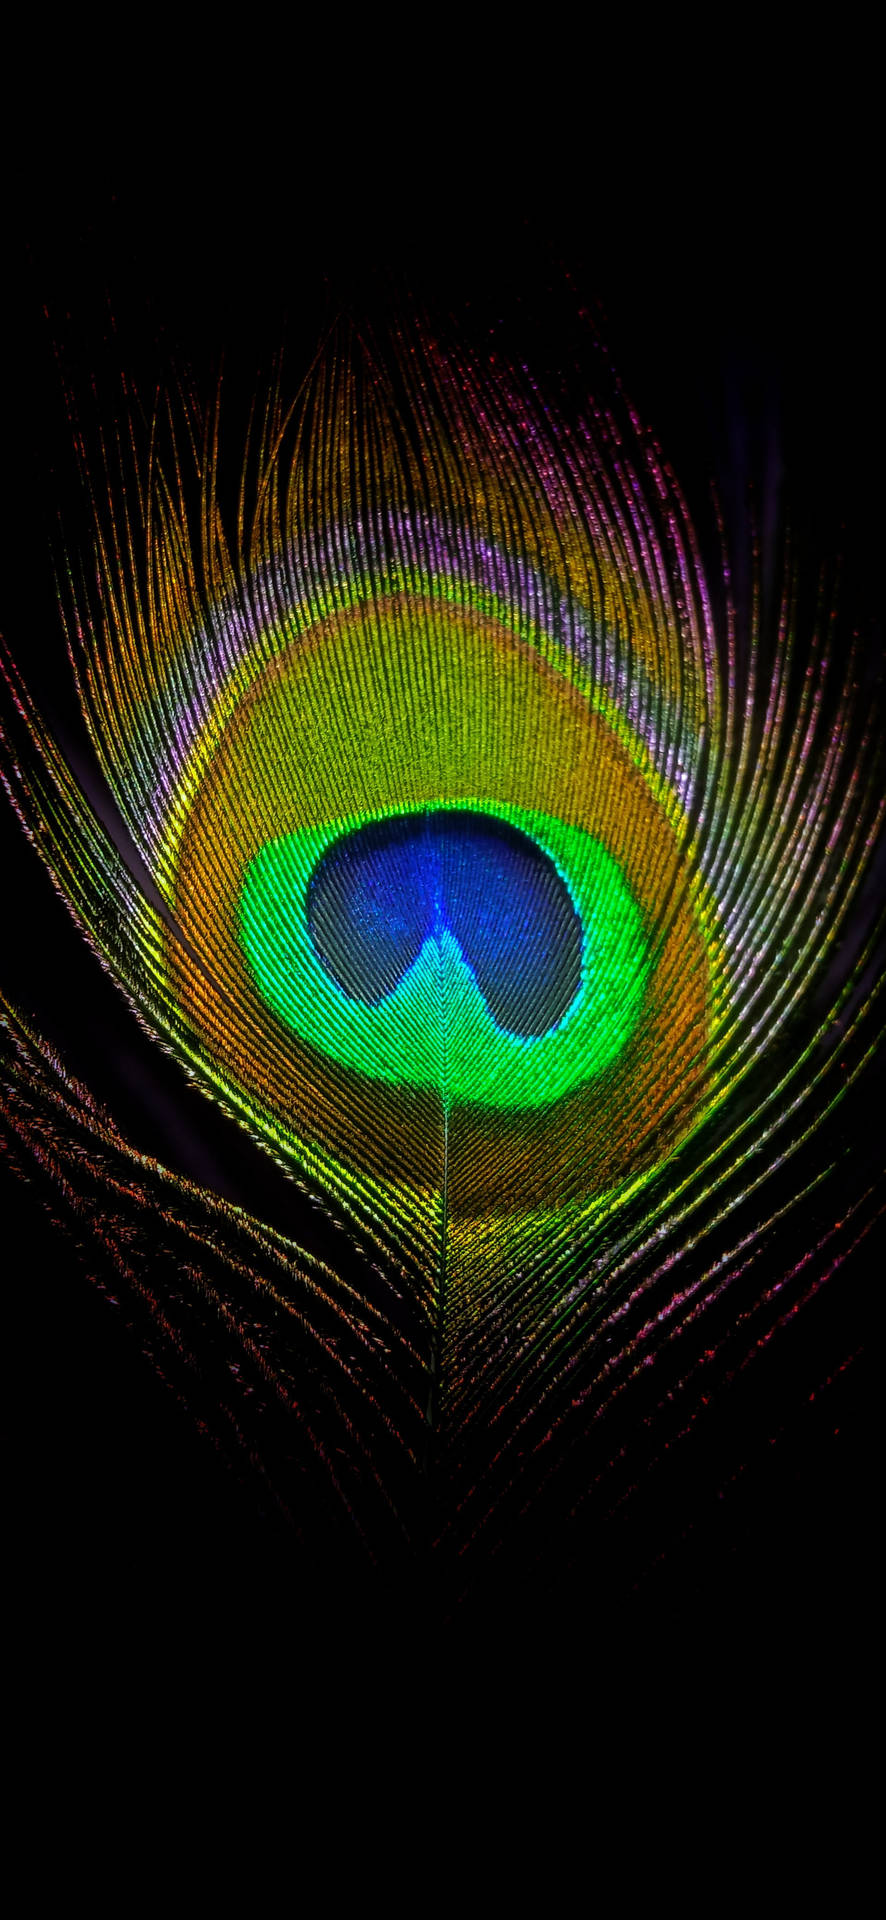 Captivating Peacock Feather On A Black Background